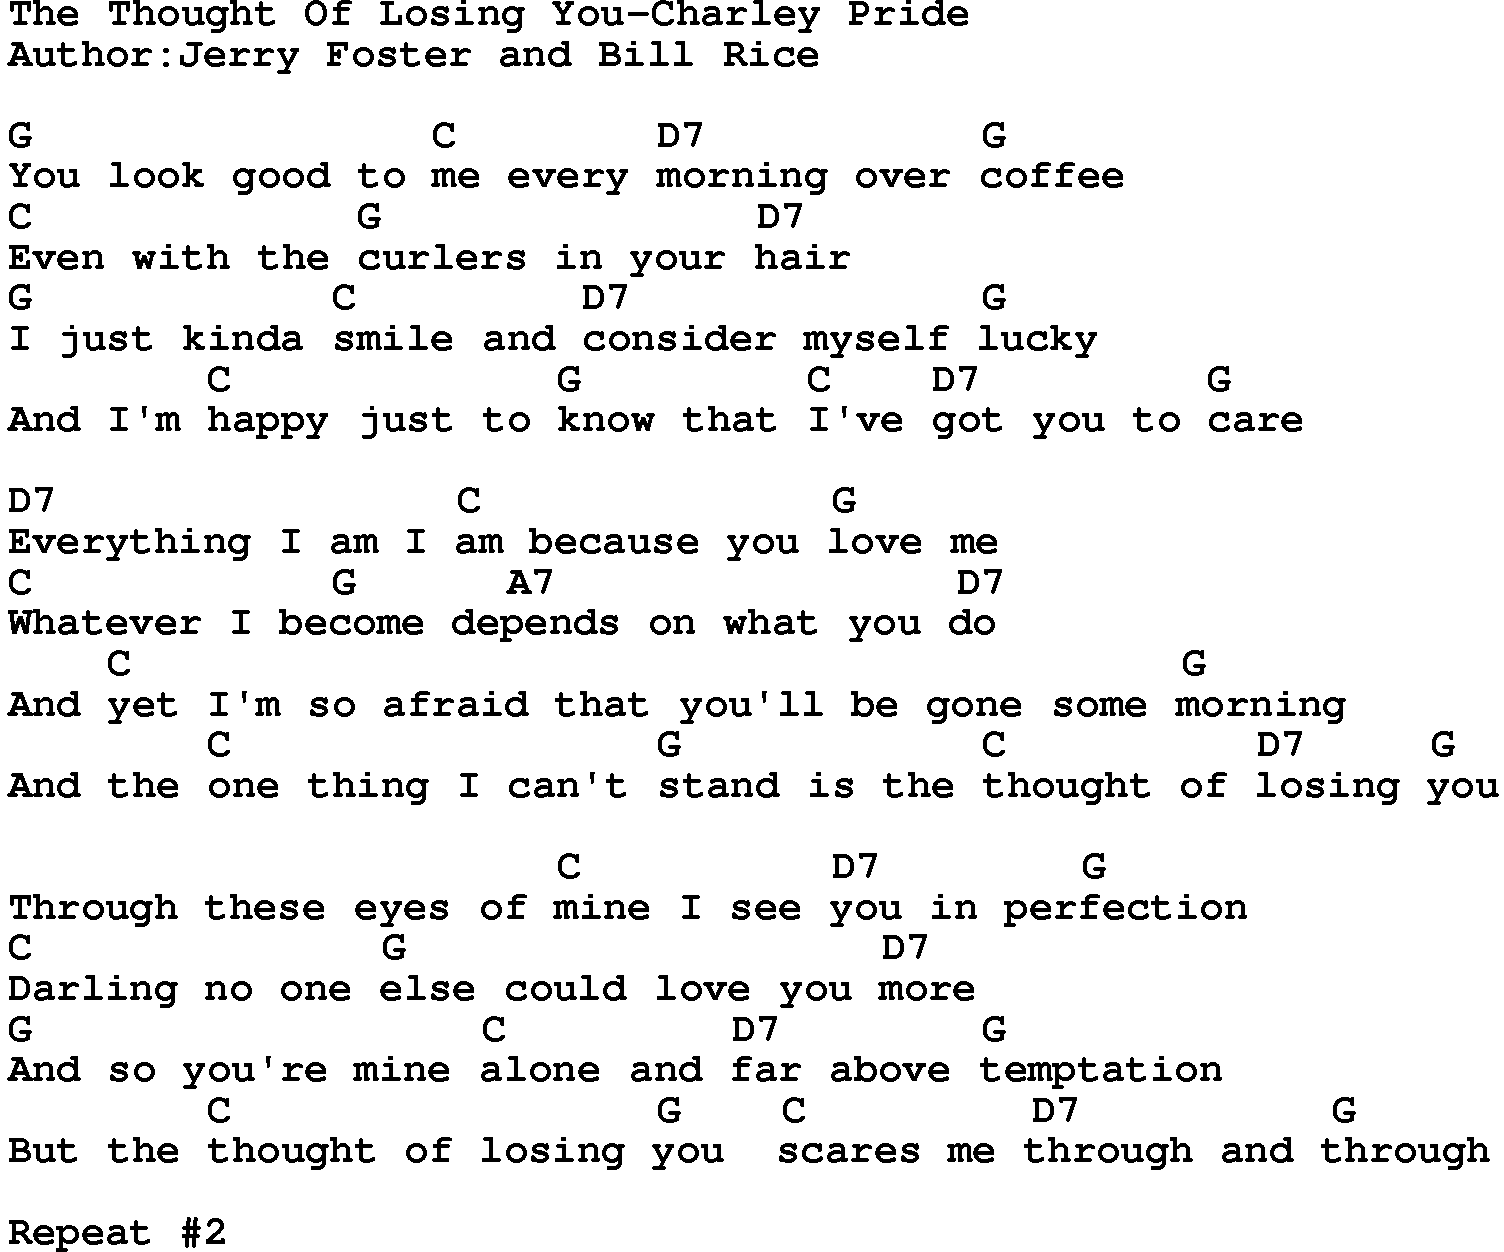 Country music song: The Thought Of Losing You-Charley Pride lyrics and chords